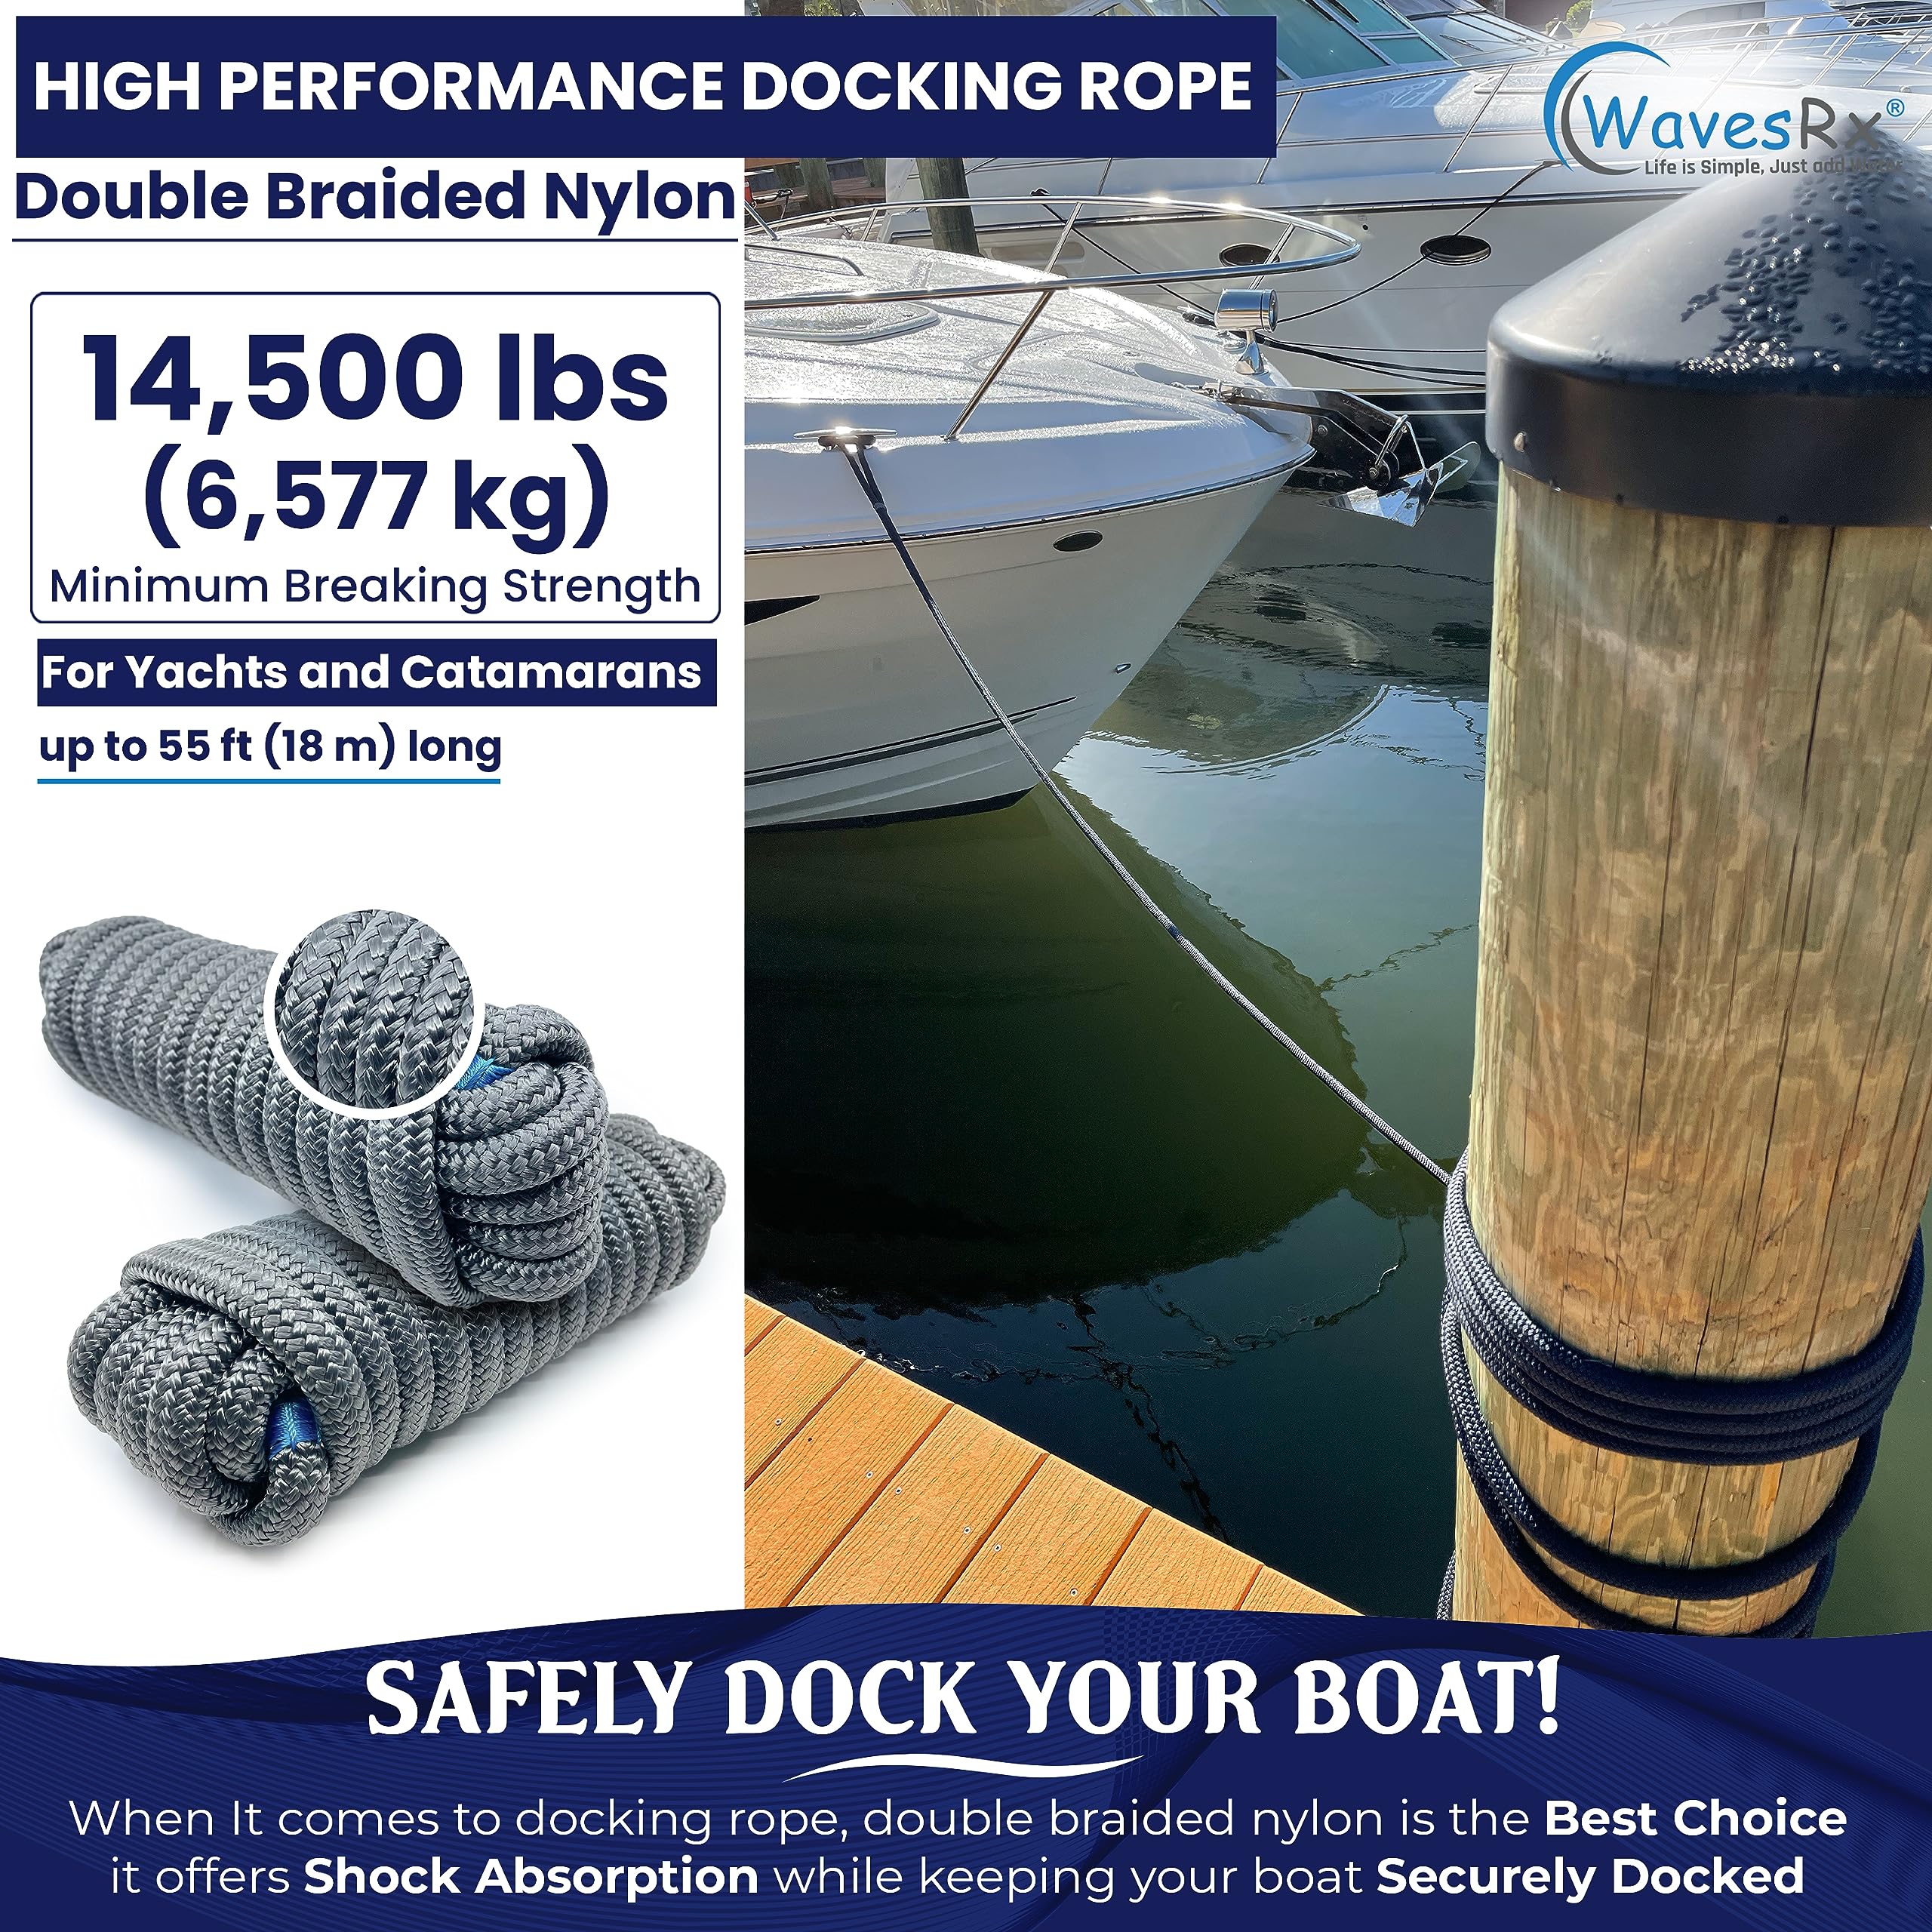  J-FM TWNTHSD Dock Lines: 5/8 x 35' Double Braided Nylon Boat  Dock Lines - Premium Boat Ropes for Secure Docking with 16 Loop - Marine  Grade Boat Rope/Dock Line - Sturdy